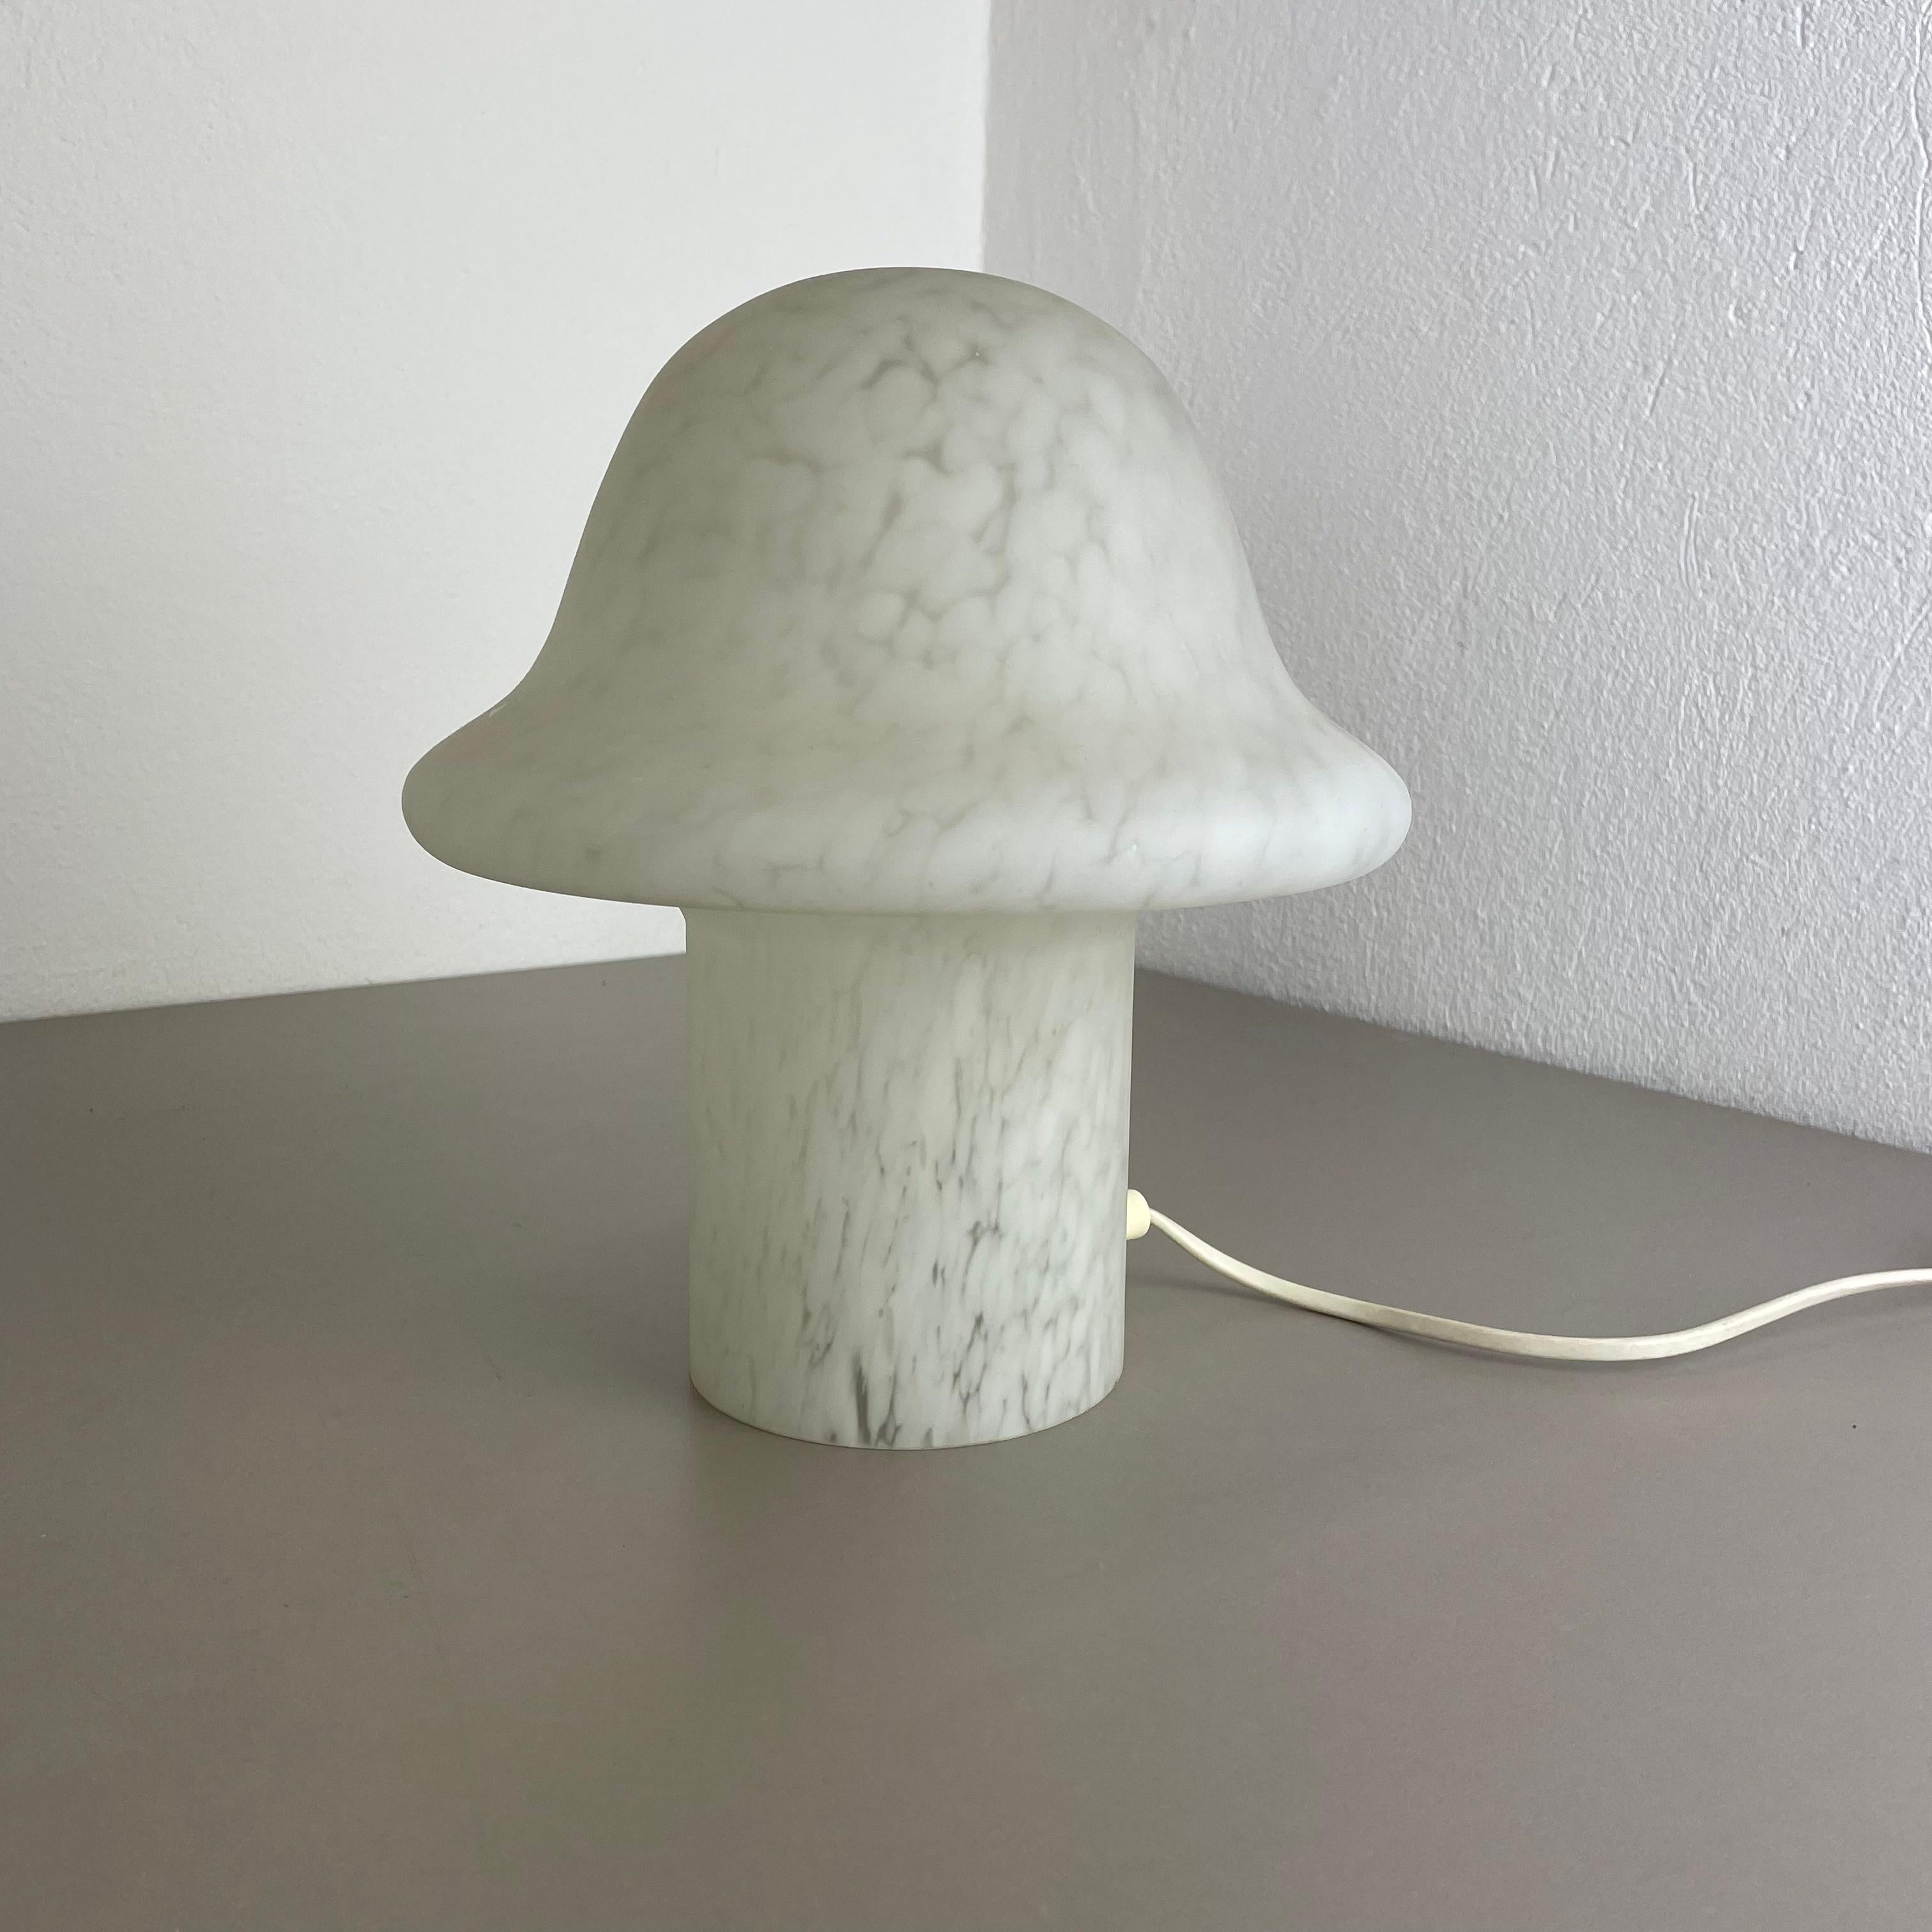 Article:

Mushroom desk lamp

Producer:

Peill & Putzler, Germany

Age:

1970s


Description:

Original desktop light made in the 1970s by Peil & Putzler in Germany. the shade in made of glass in form of a mushroom, with diameter of